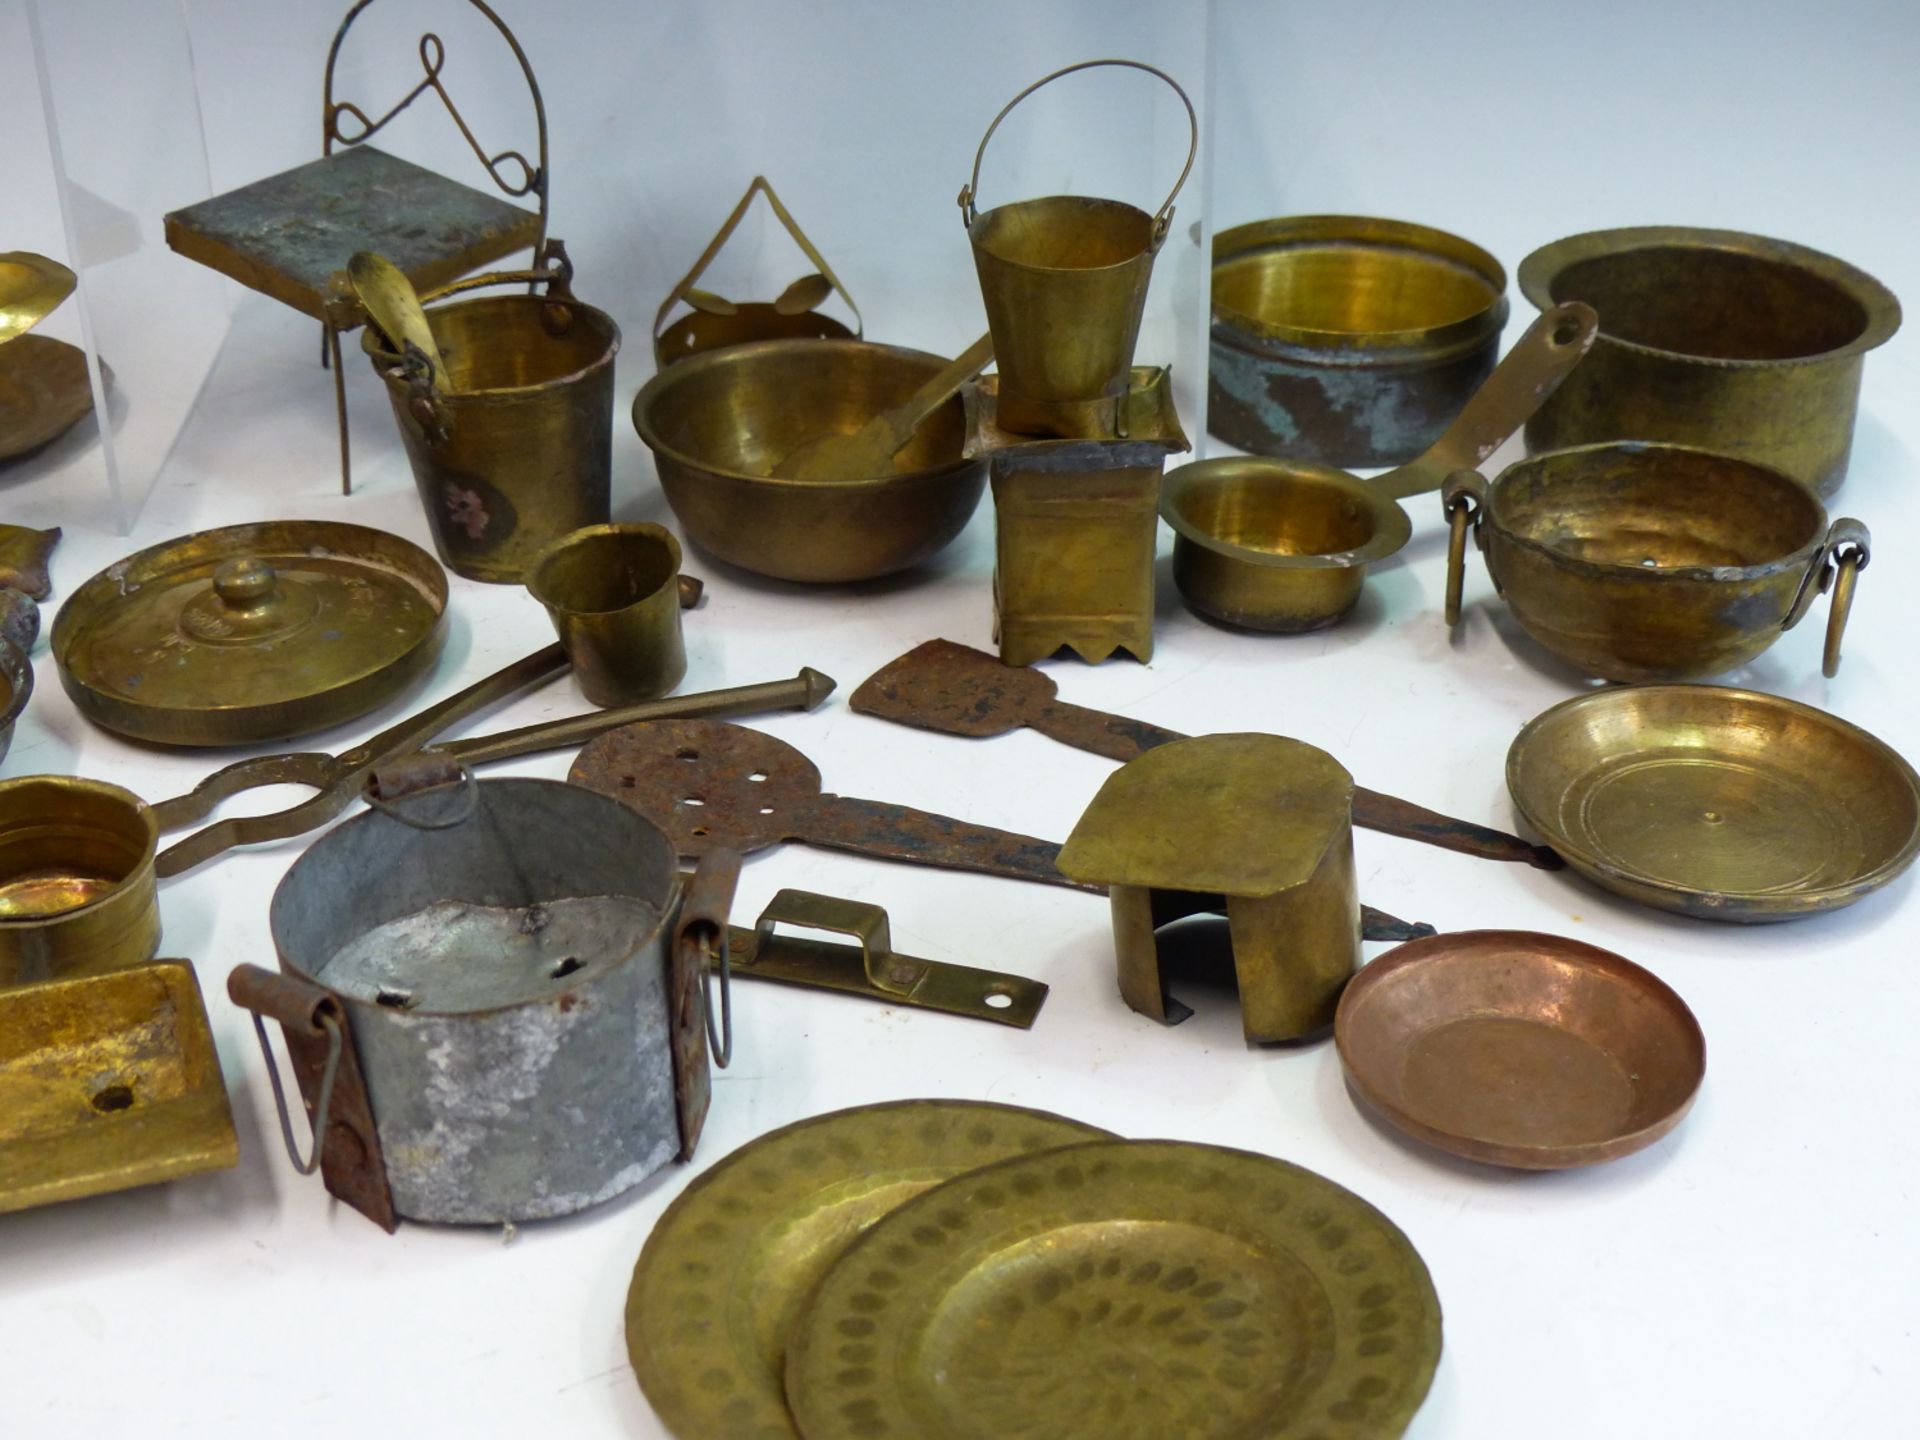 A GROUP OF BRASS VINTAGE INDIAN CHILDS OR DOLLS TOY COOKING UTENSILS AND POTS. - Image 3 of 4